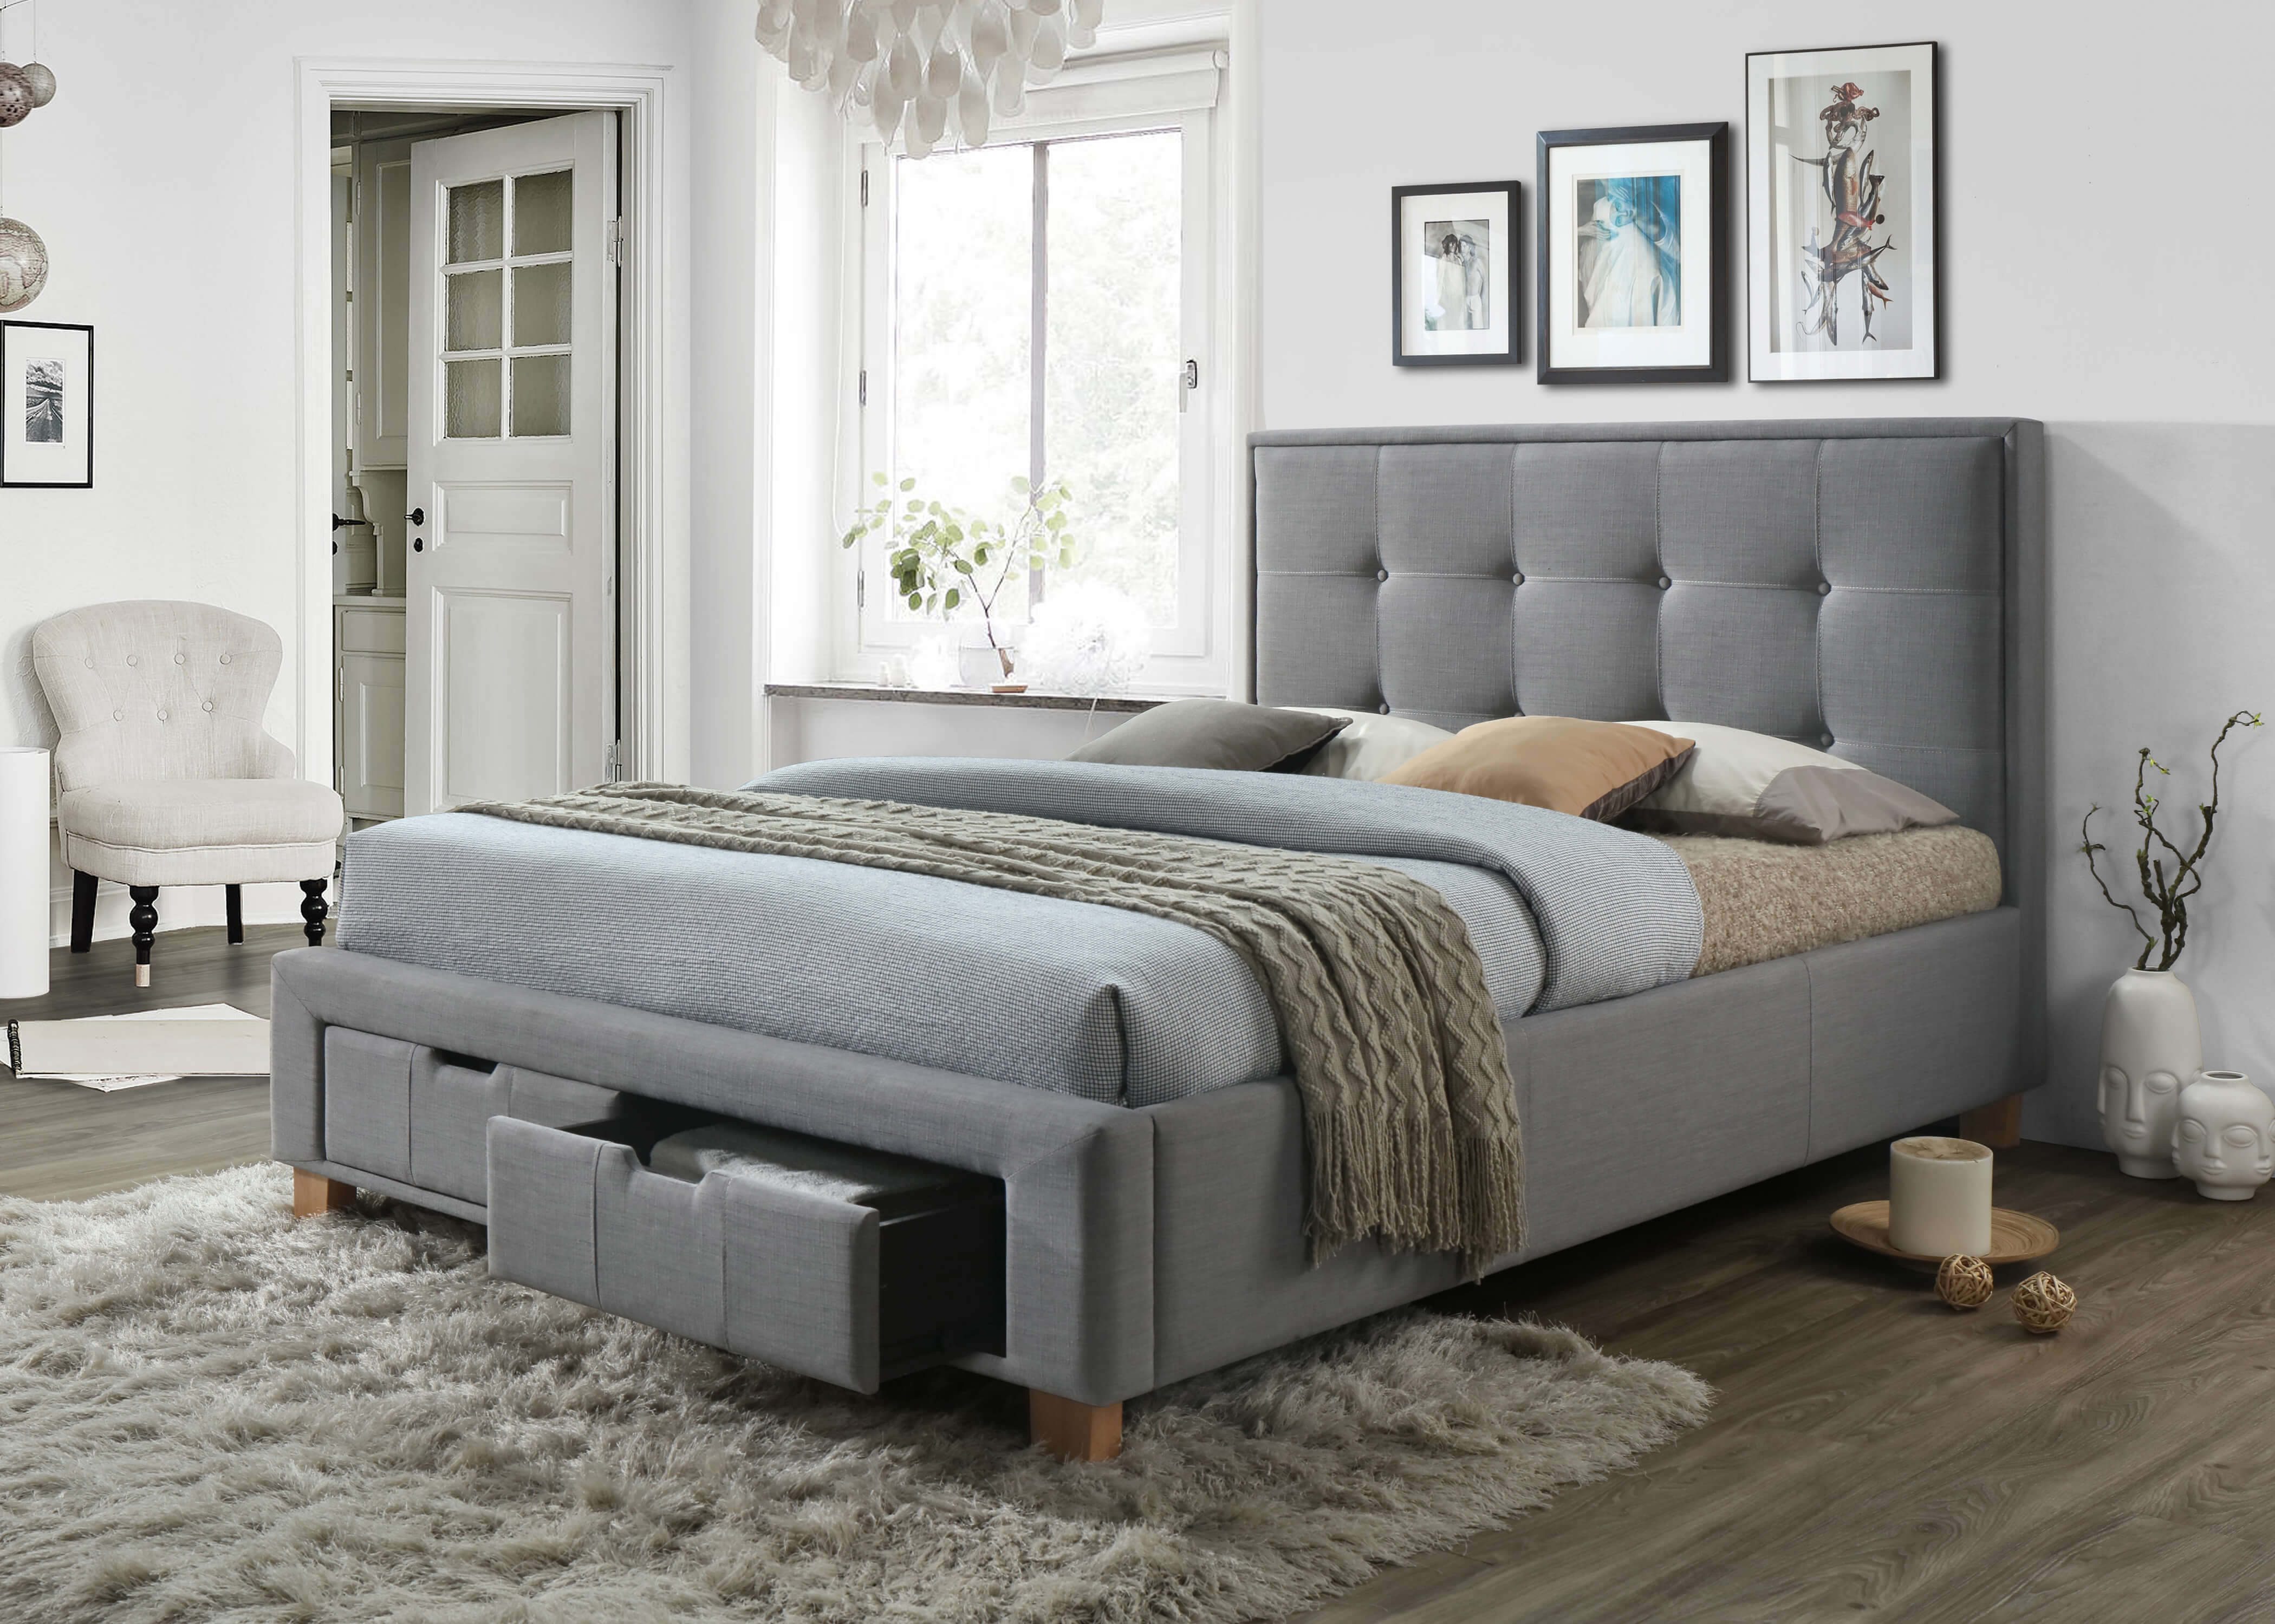 Halo Bed: Versatile Fabric Beds with Drawers